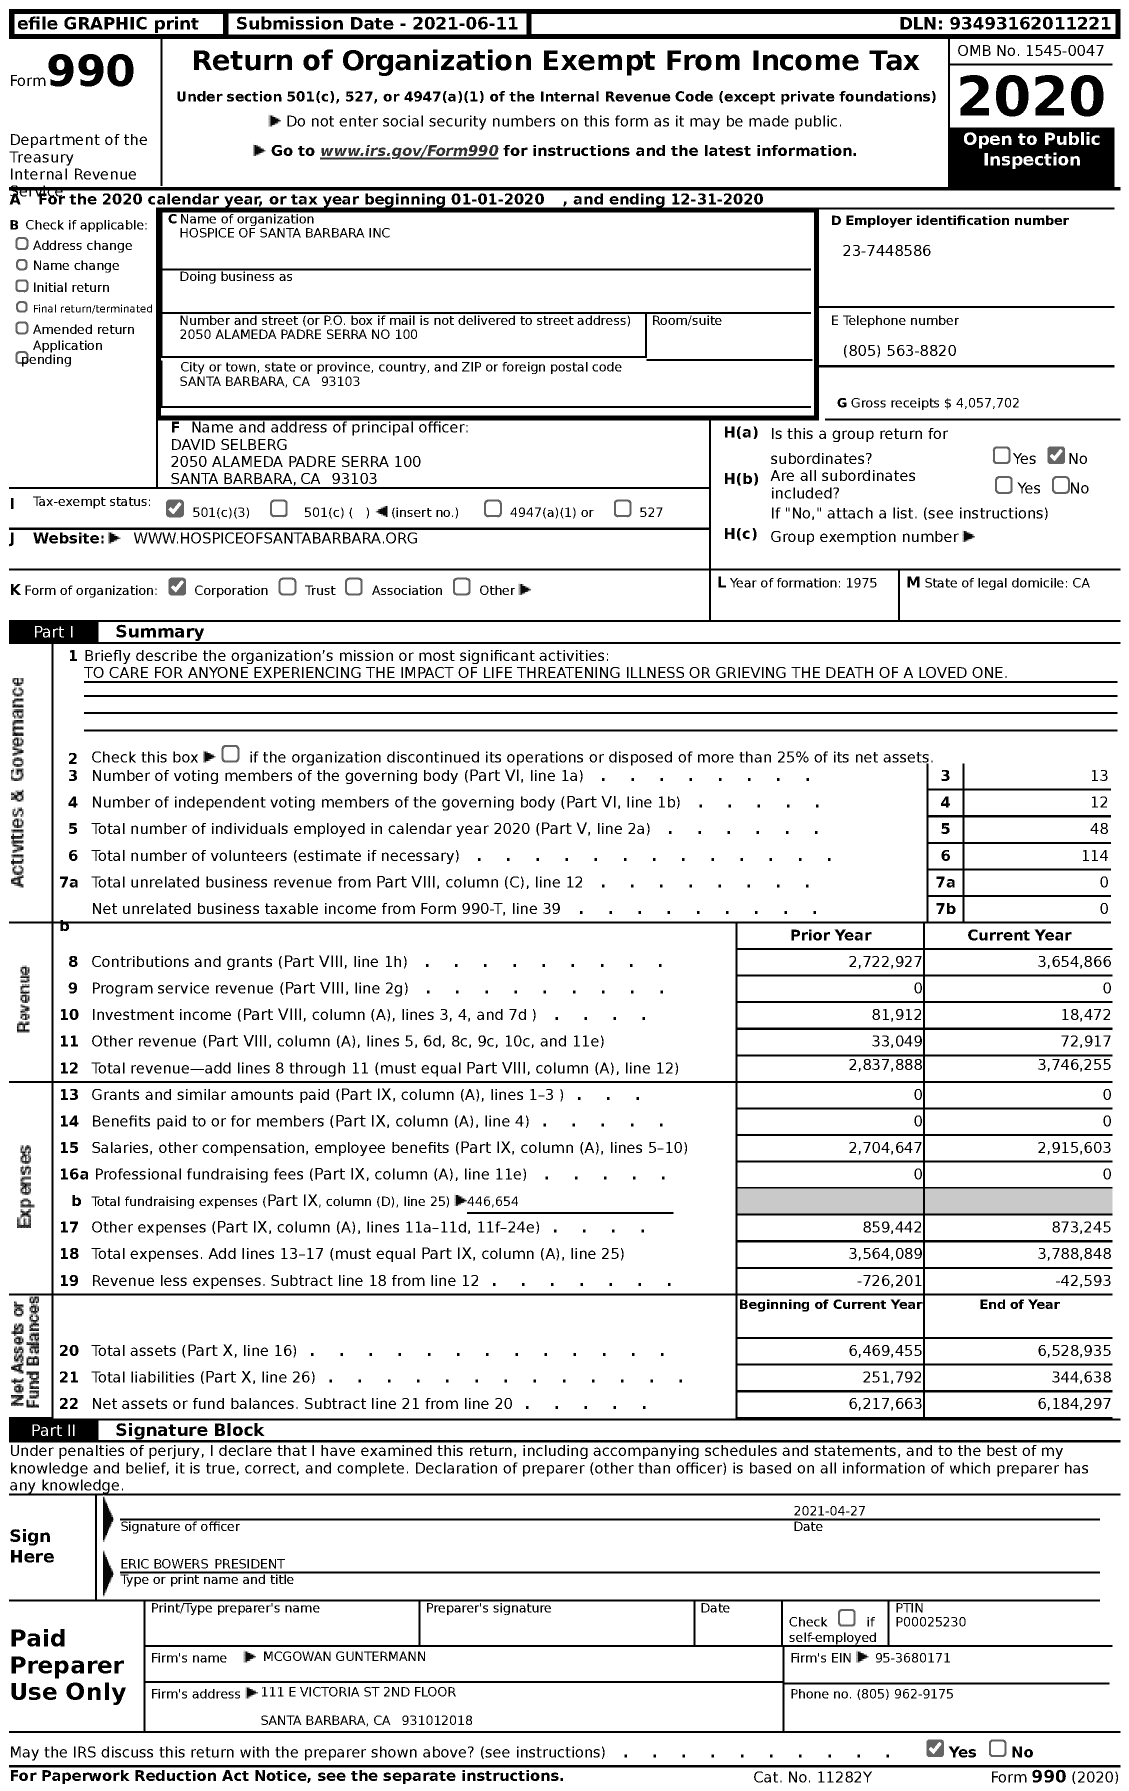 Image of first page of 2020 Form 990 for Hospice of Santa Barbara (HSB)